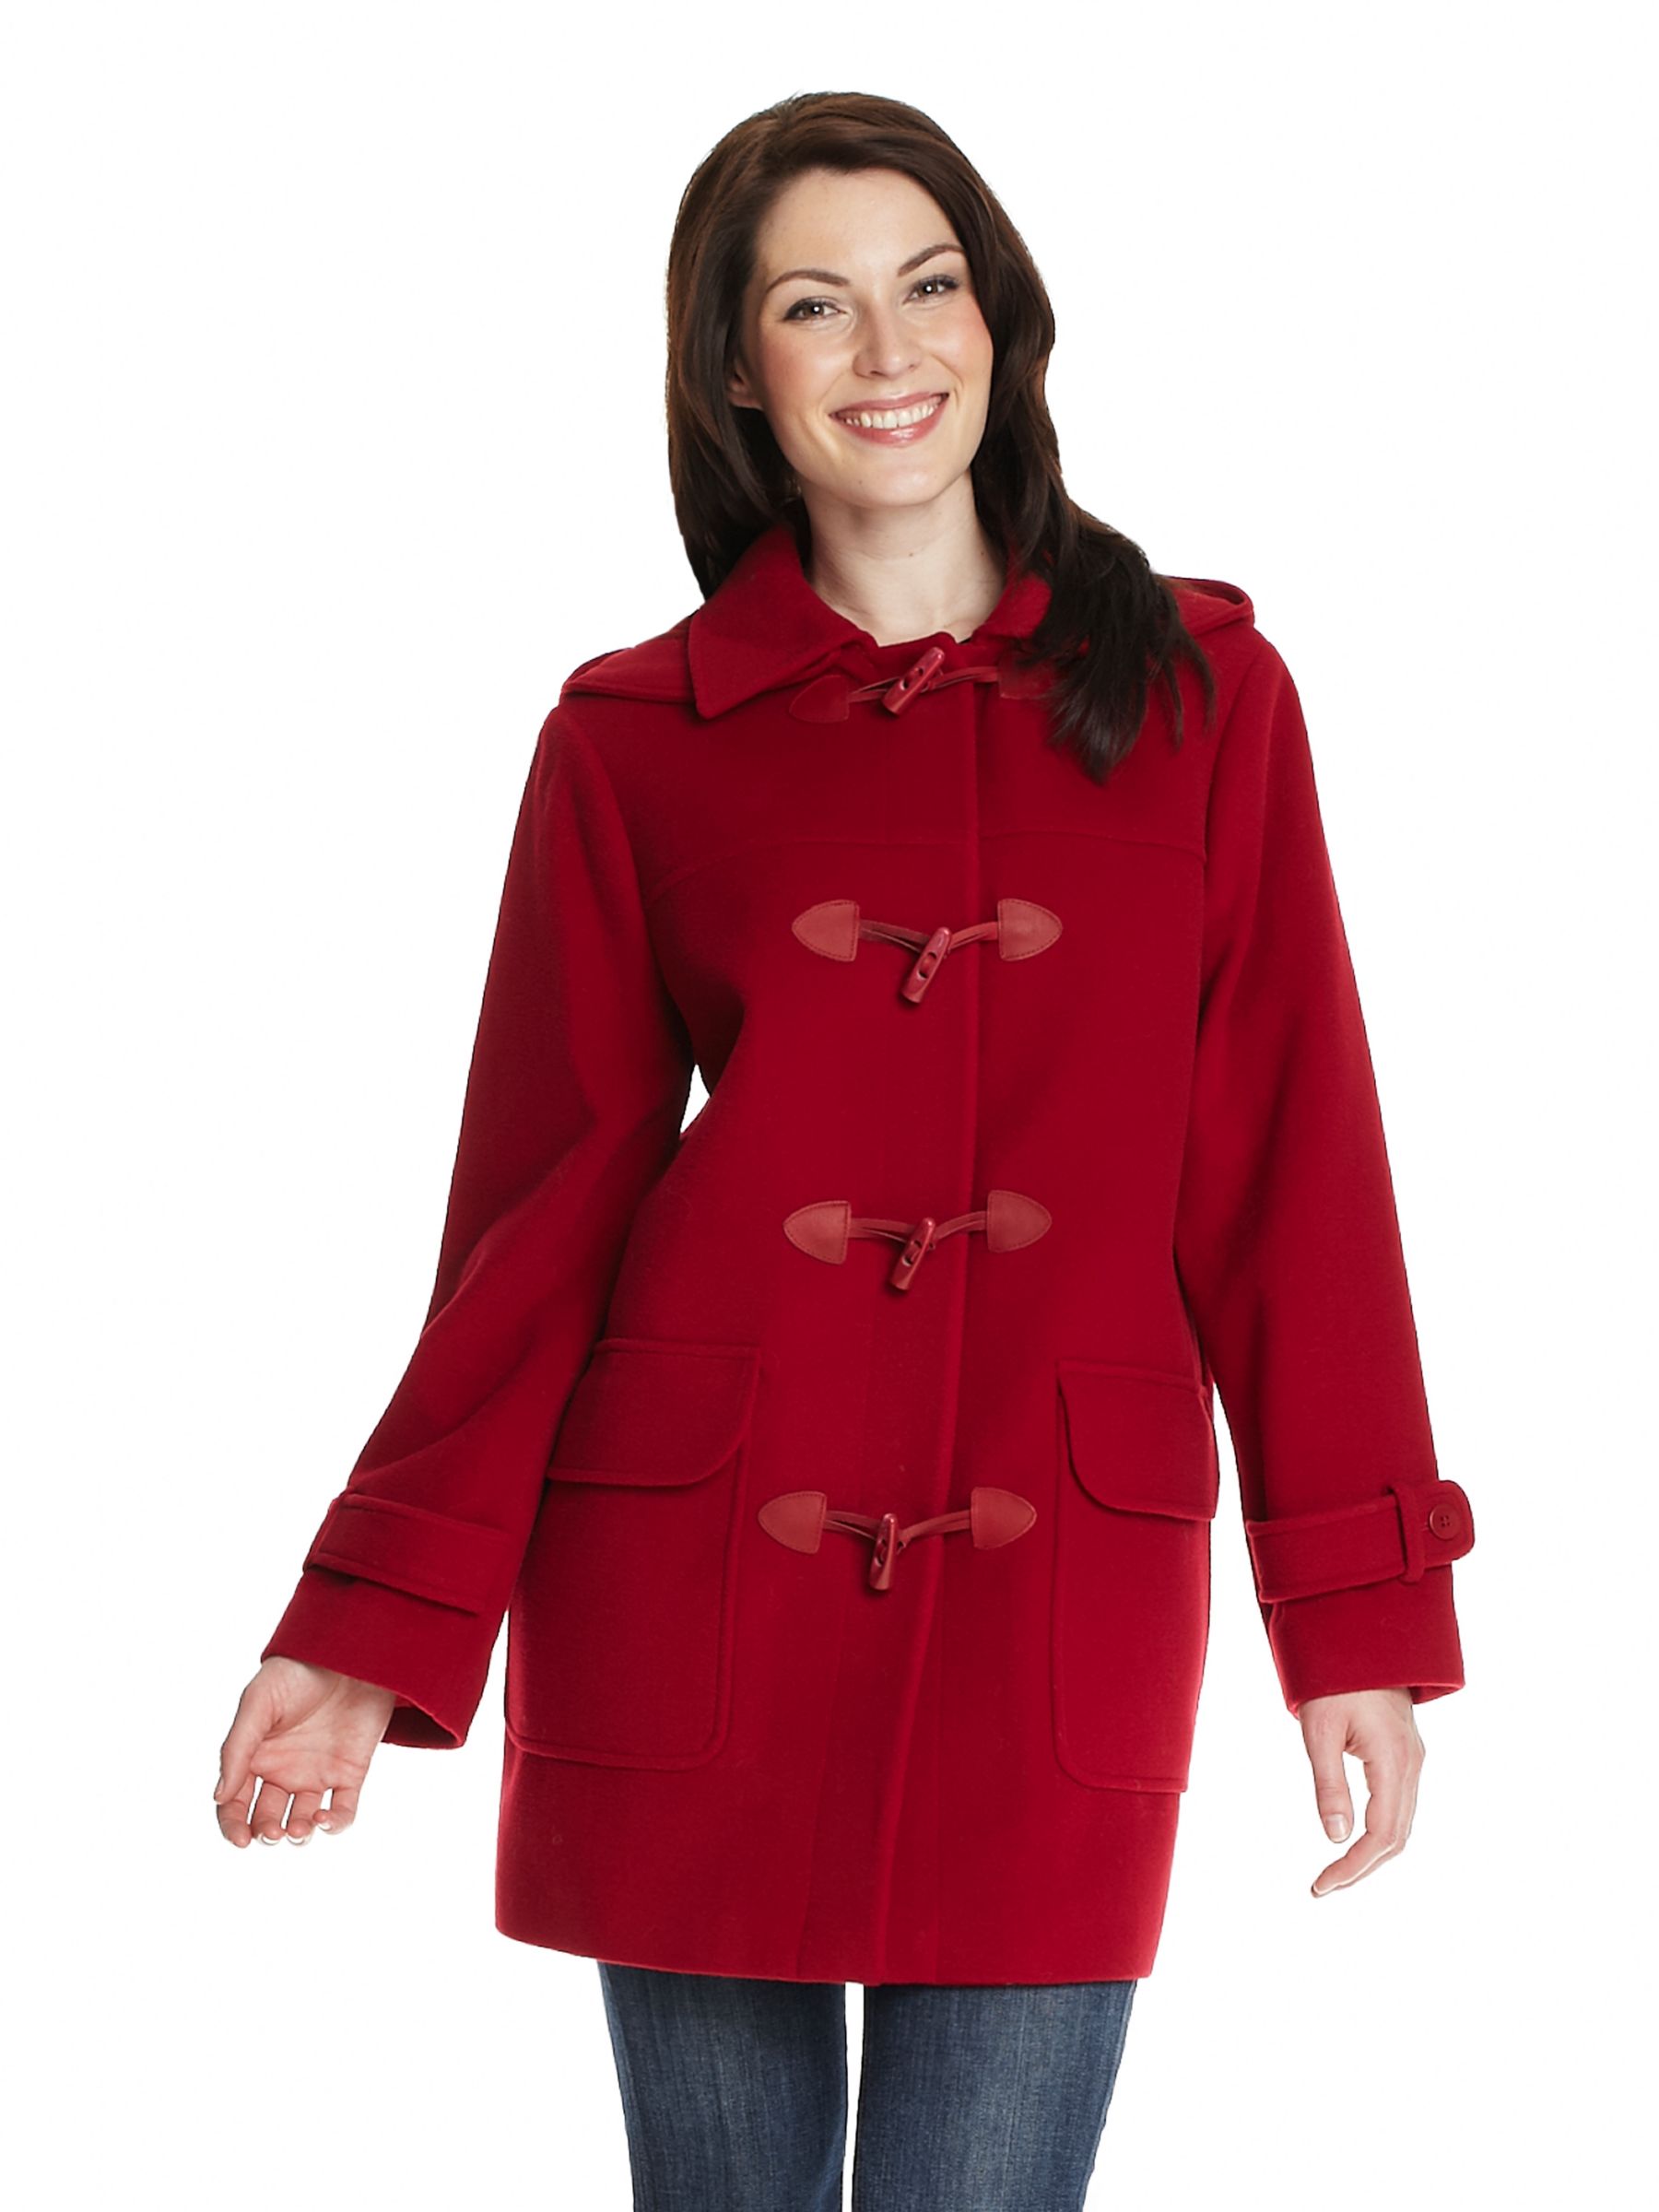 Four Seasons Traditional Wool Duffle Coat, Red at JohnLewis